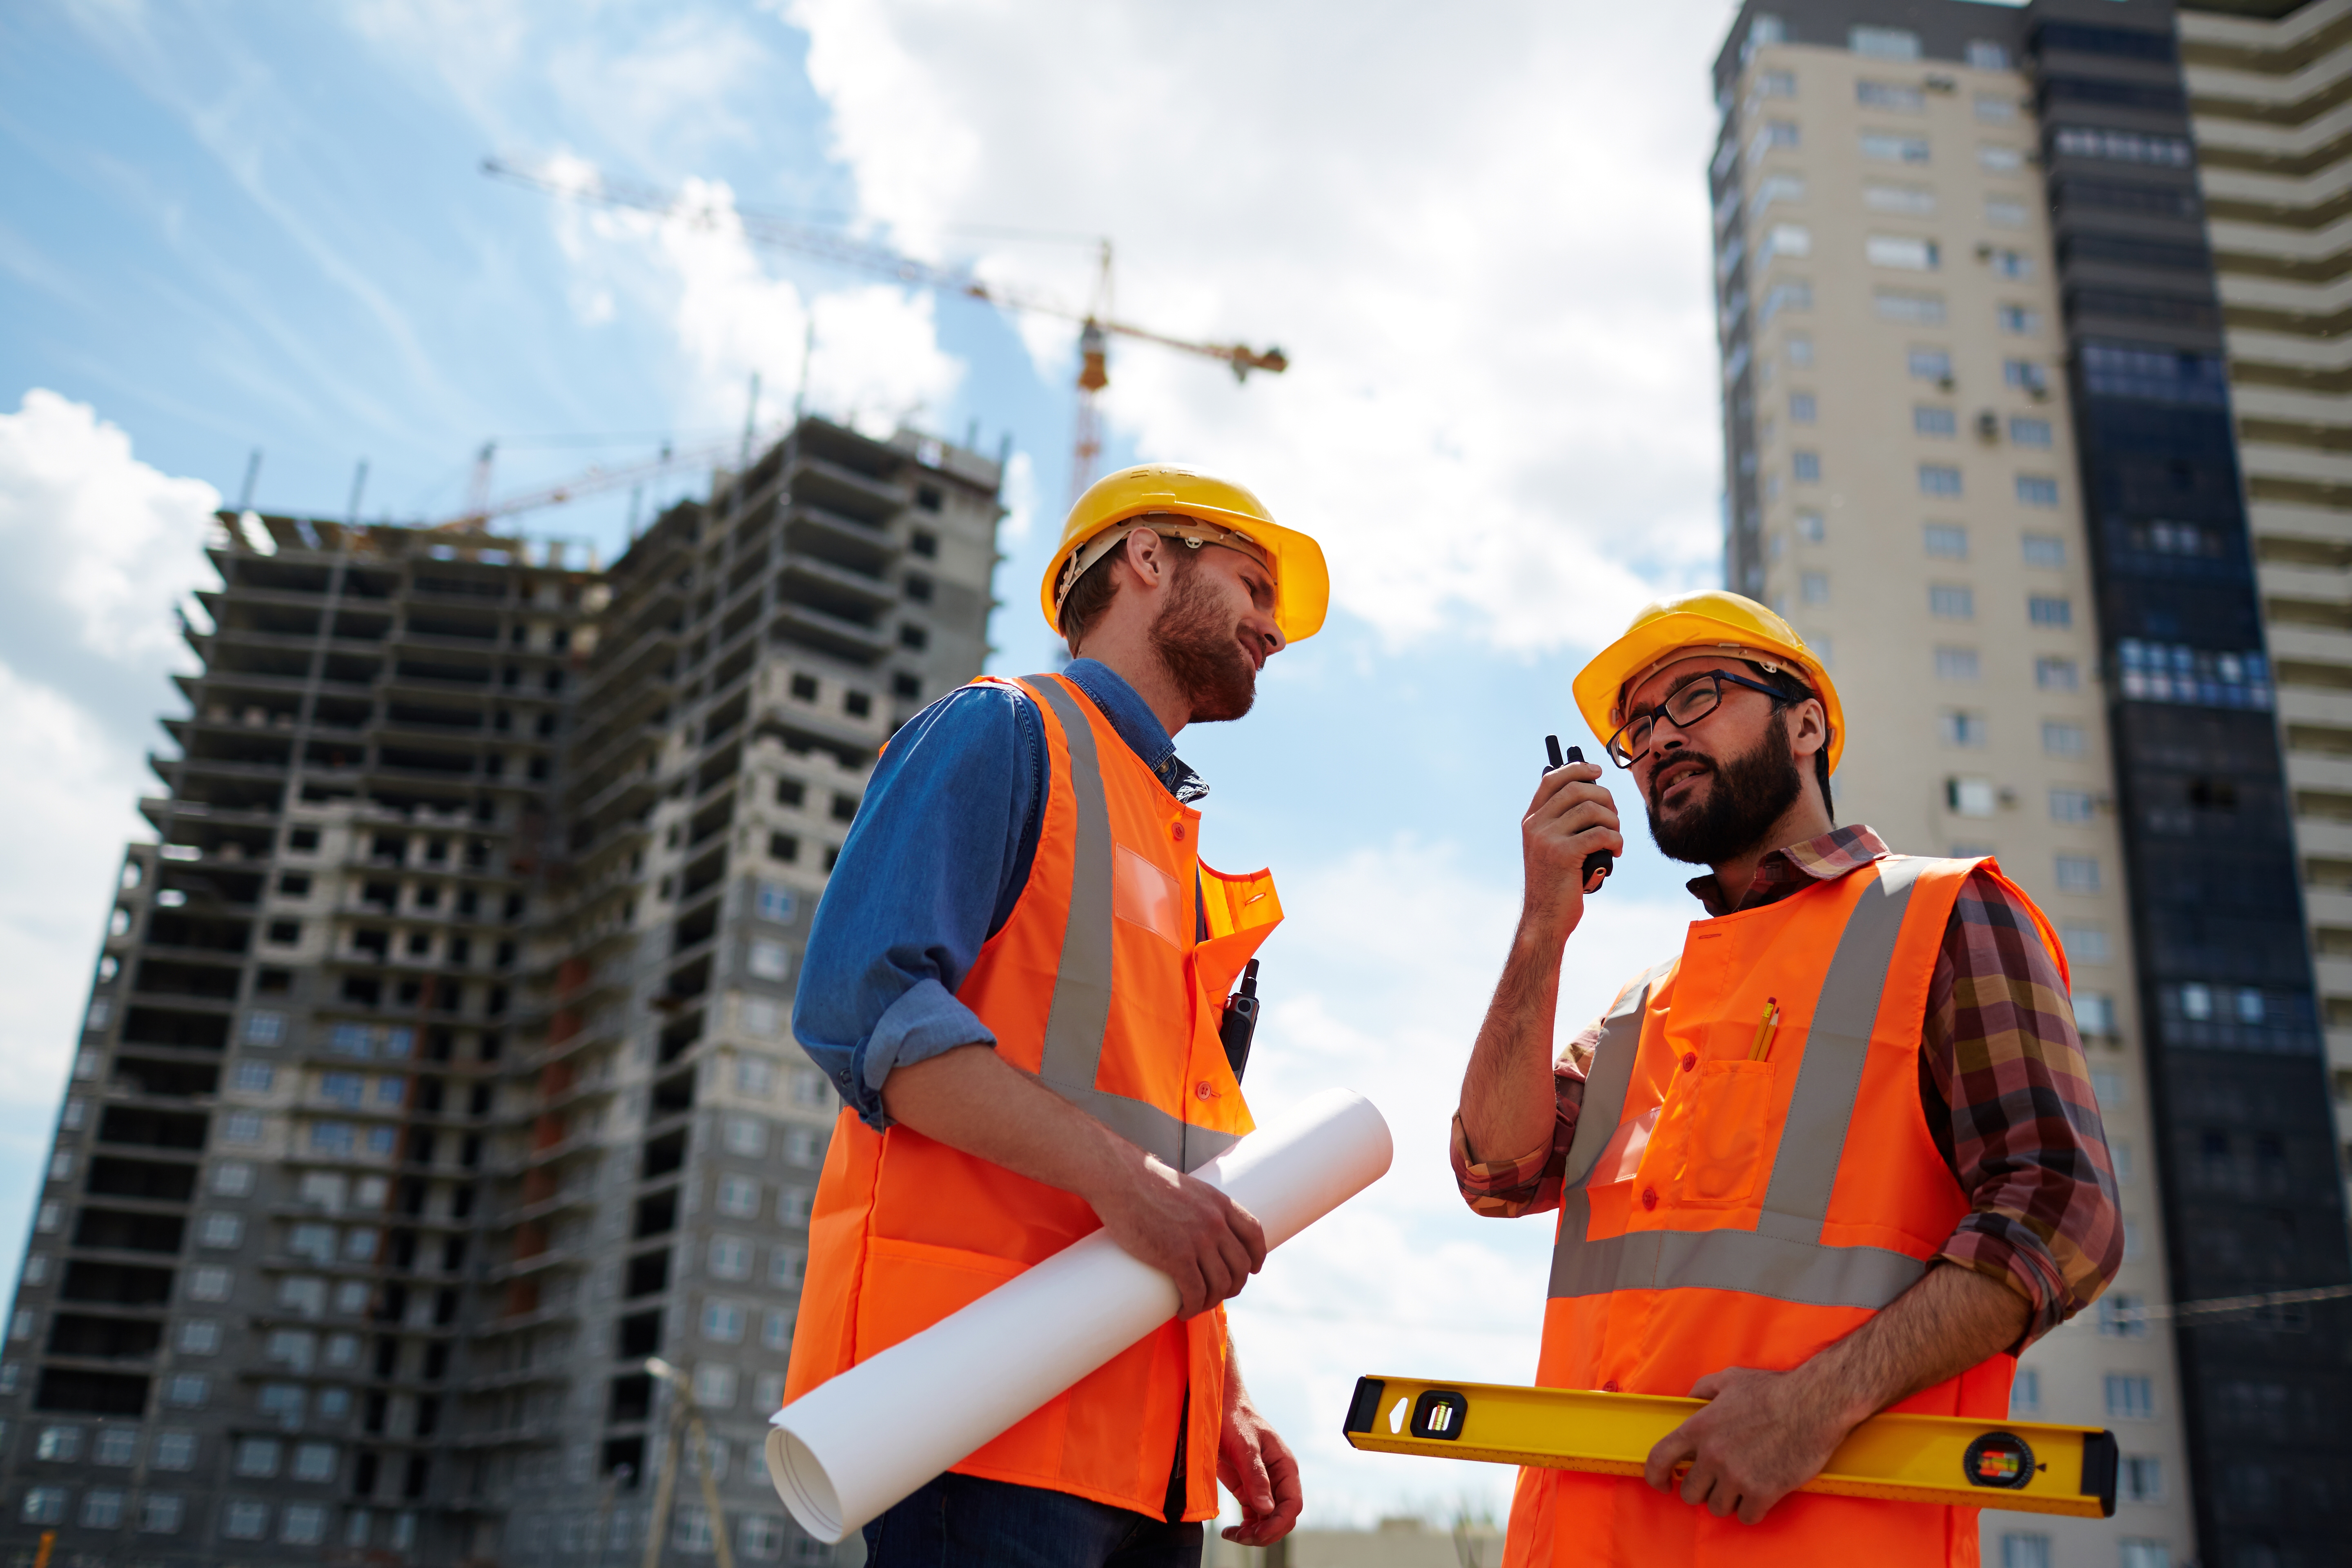 Virtual Bookkeeping and CFO Services Save Construction Firm $70K